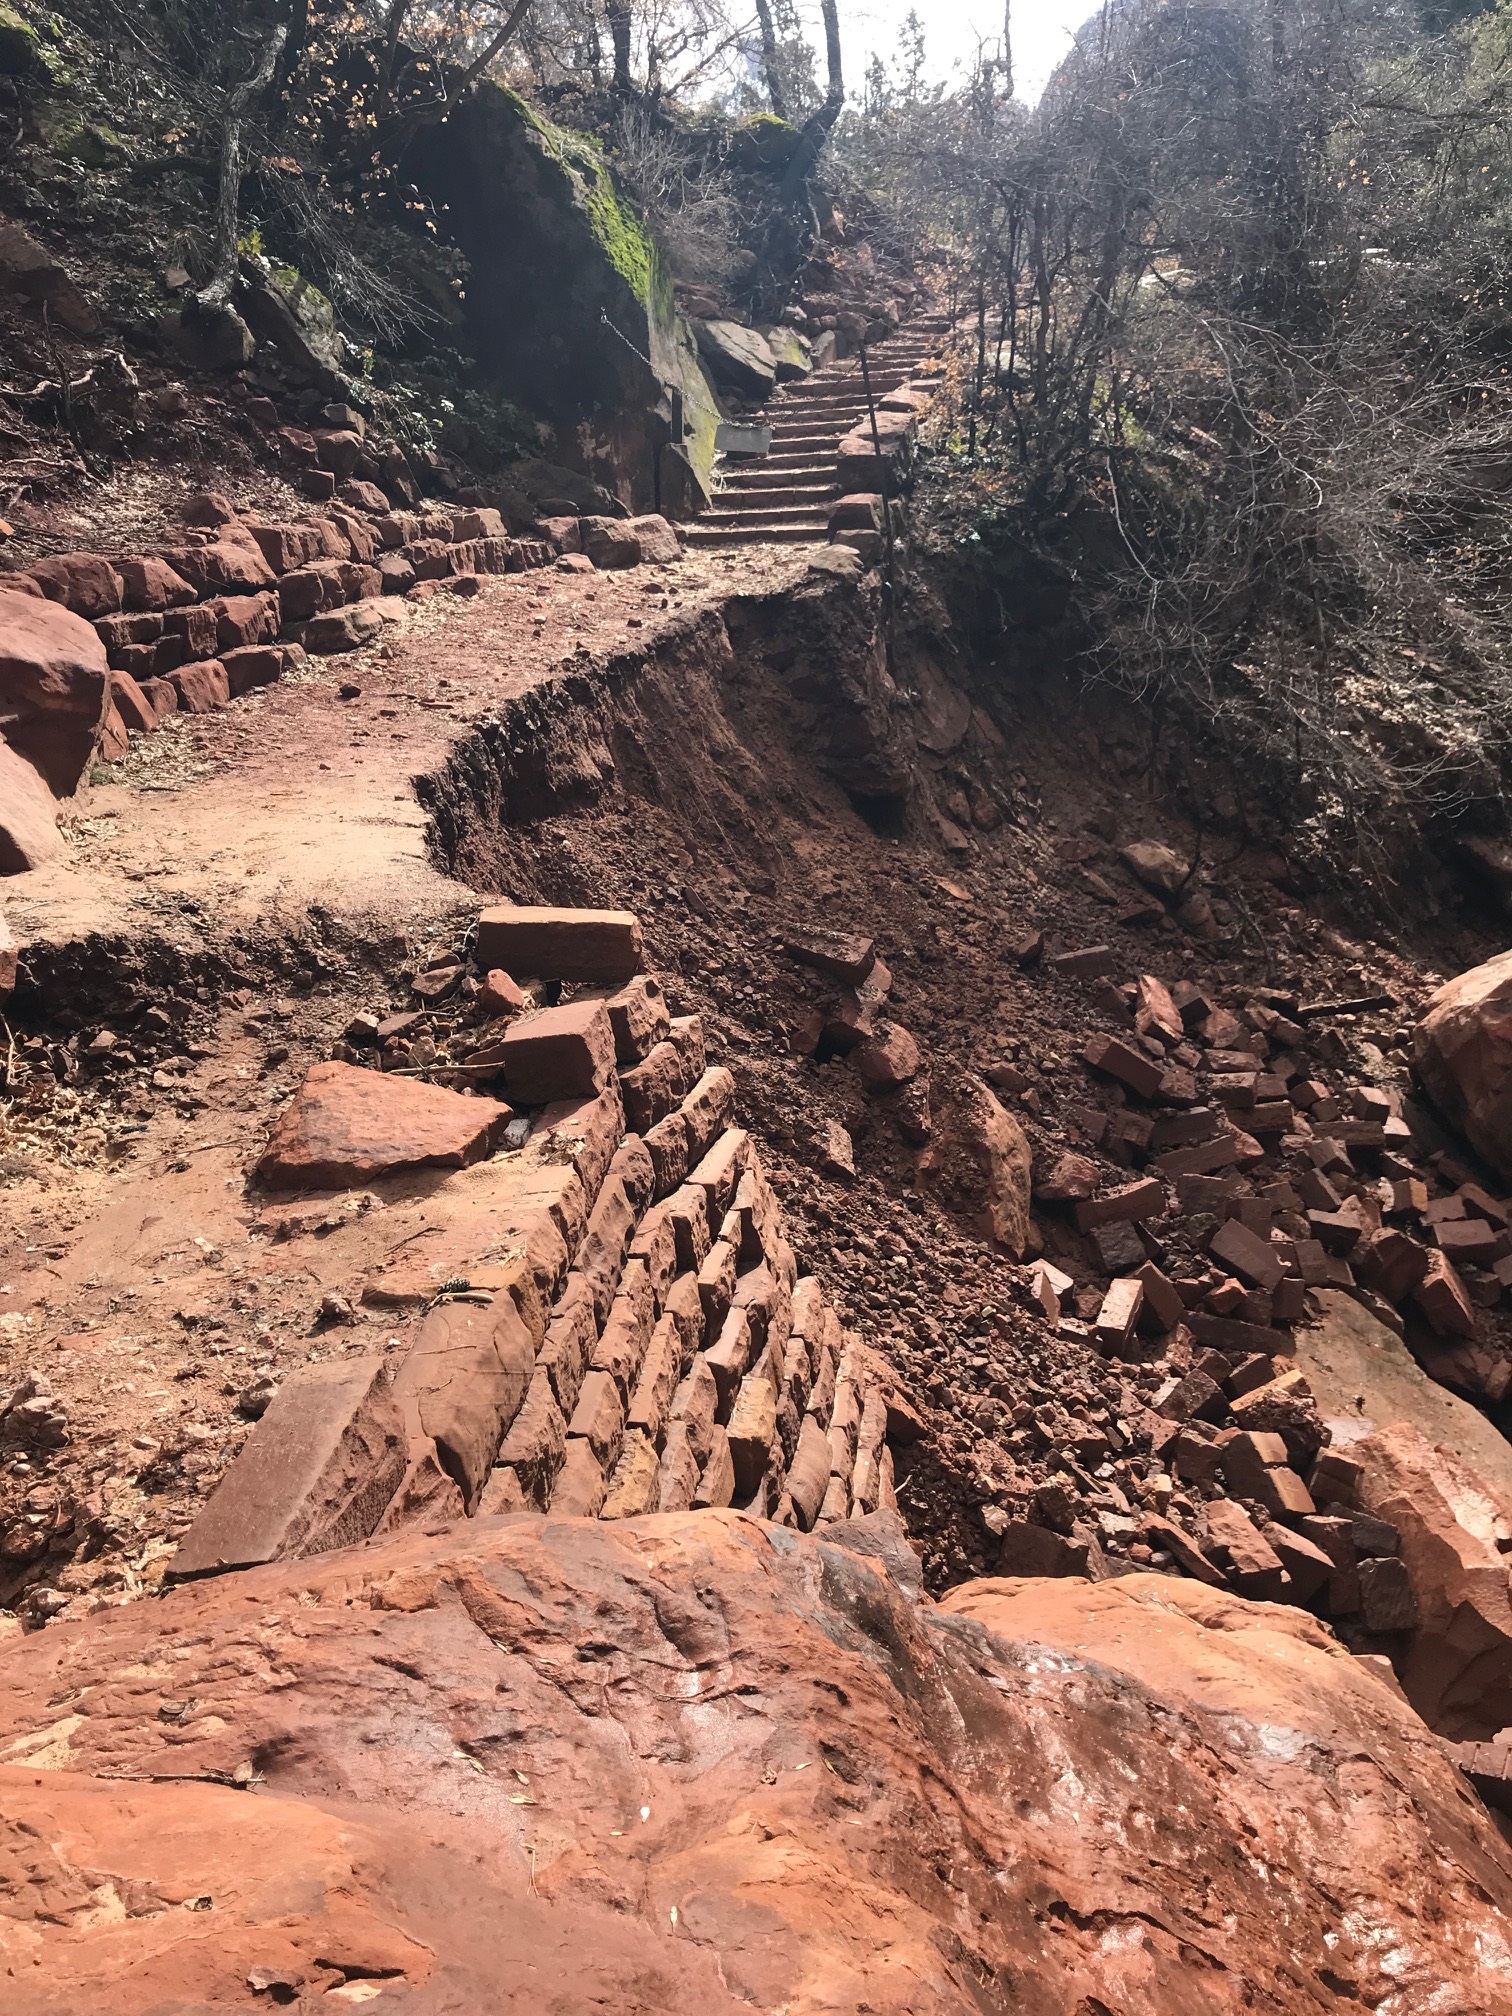 Damaged trail at Lower Emerald Pools